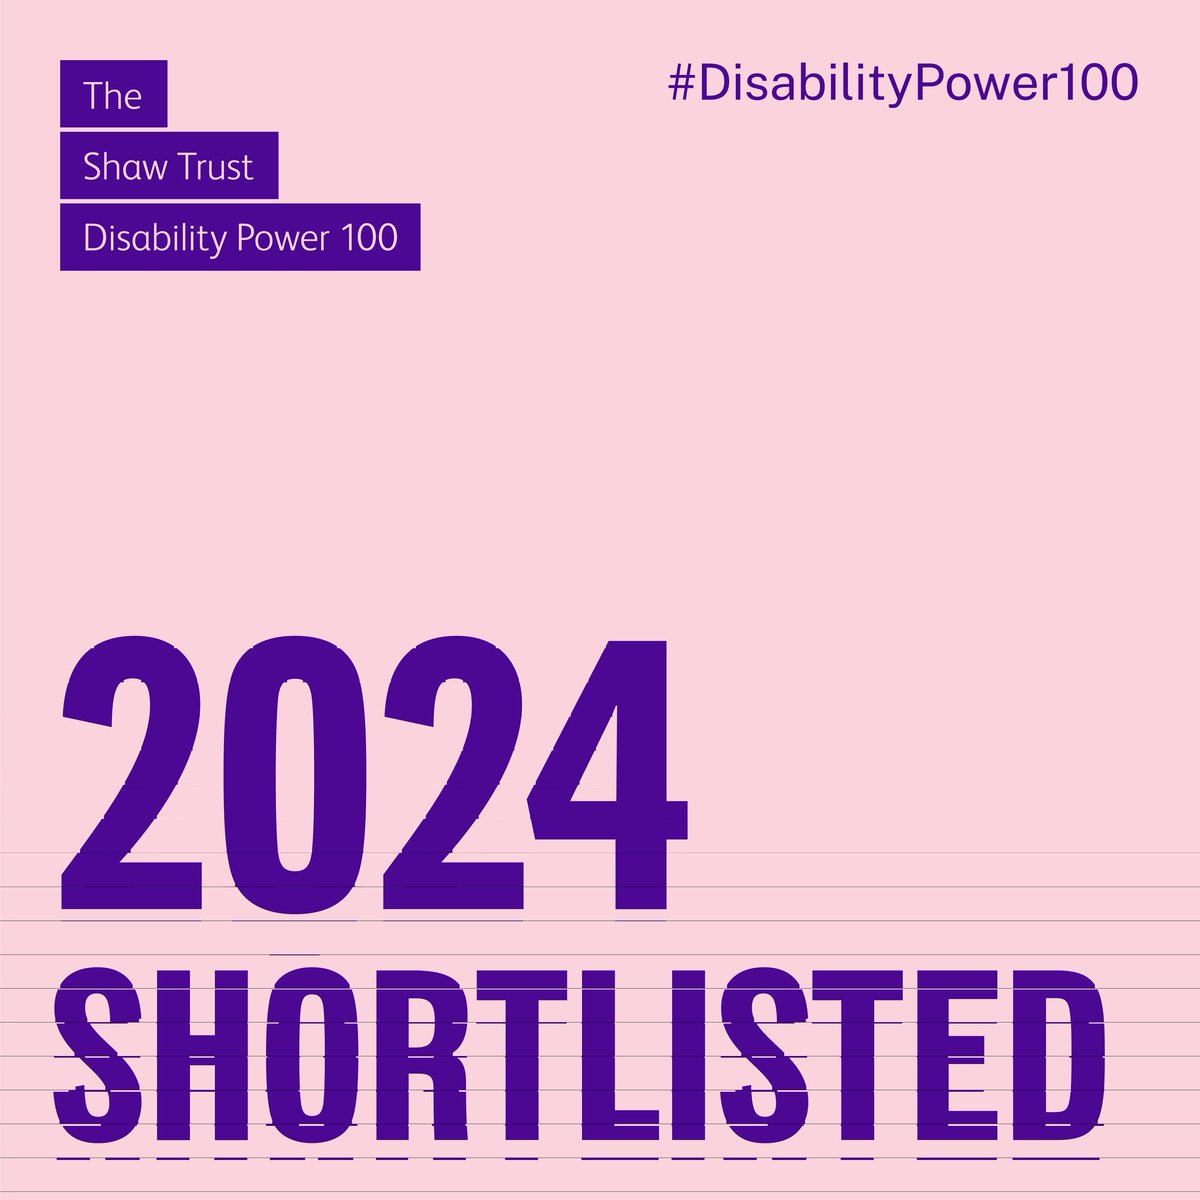 I've been shortlisted for The @ShawTrust Disability Power 100!

The Disability Power 100 recognises the most influential disabled people in the UK. 

I feel so honoured to have even been considered amongst so many excellent people! Good luck everyone 🥳

#DisabilityPower100